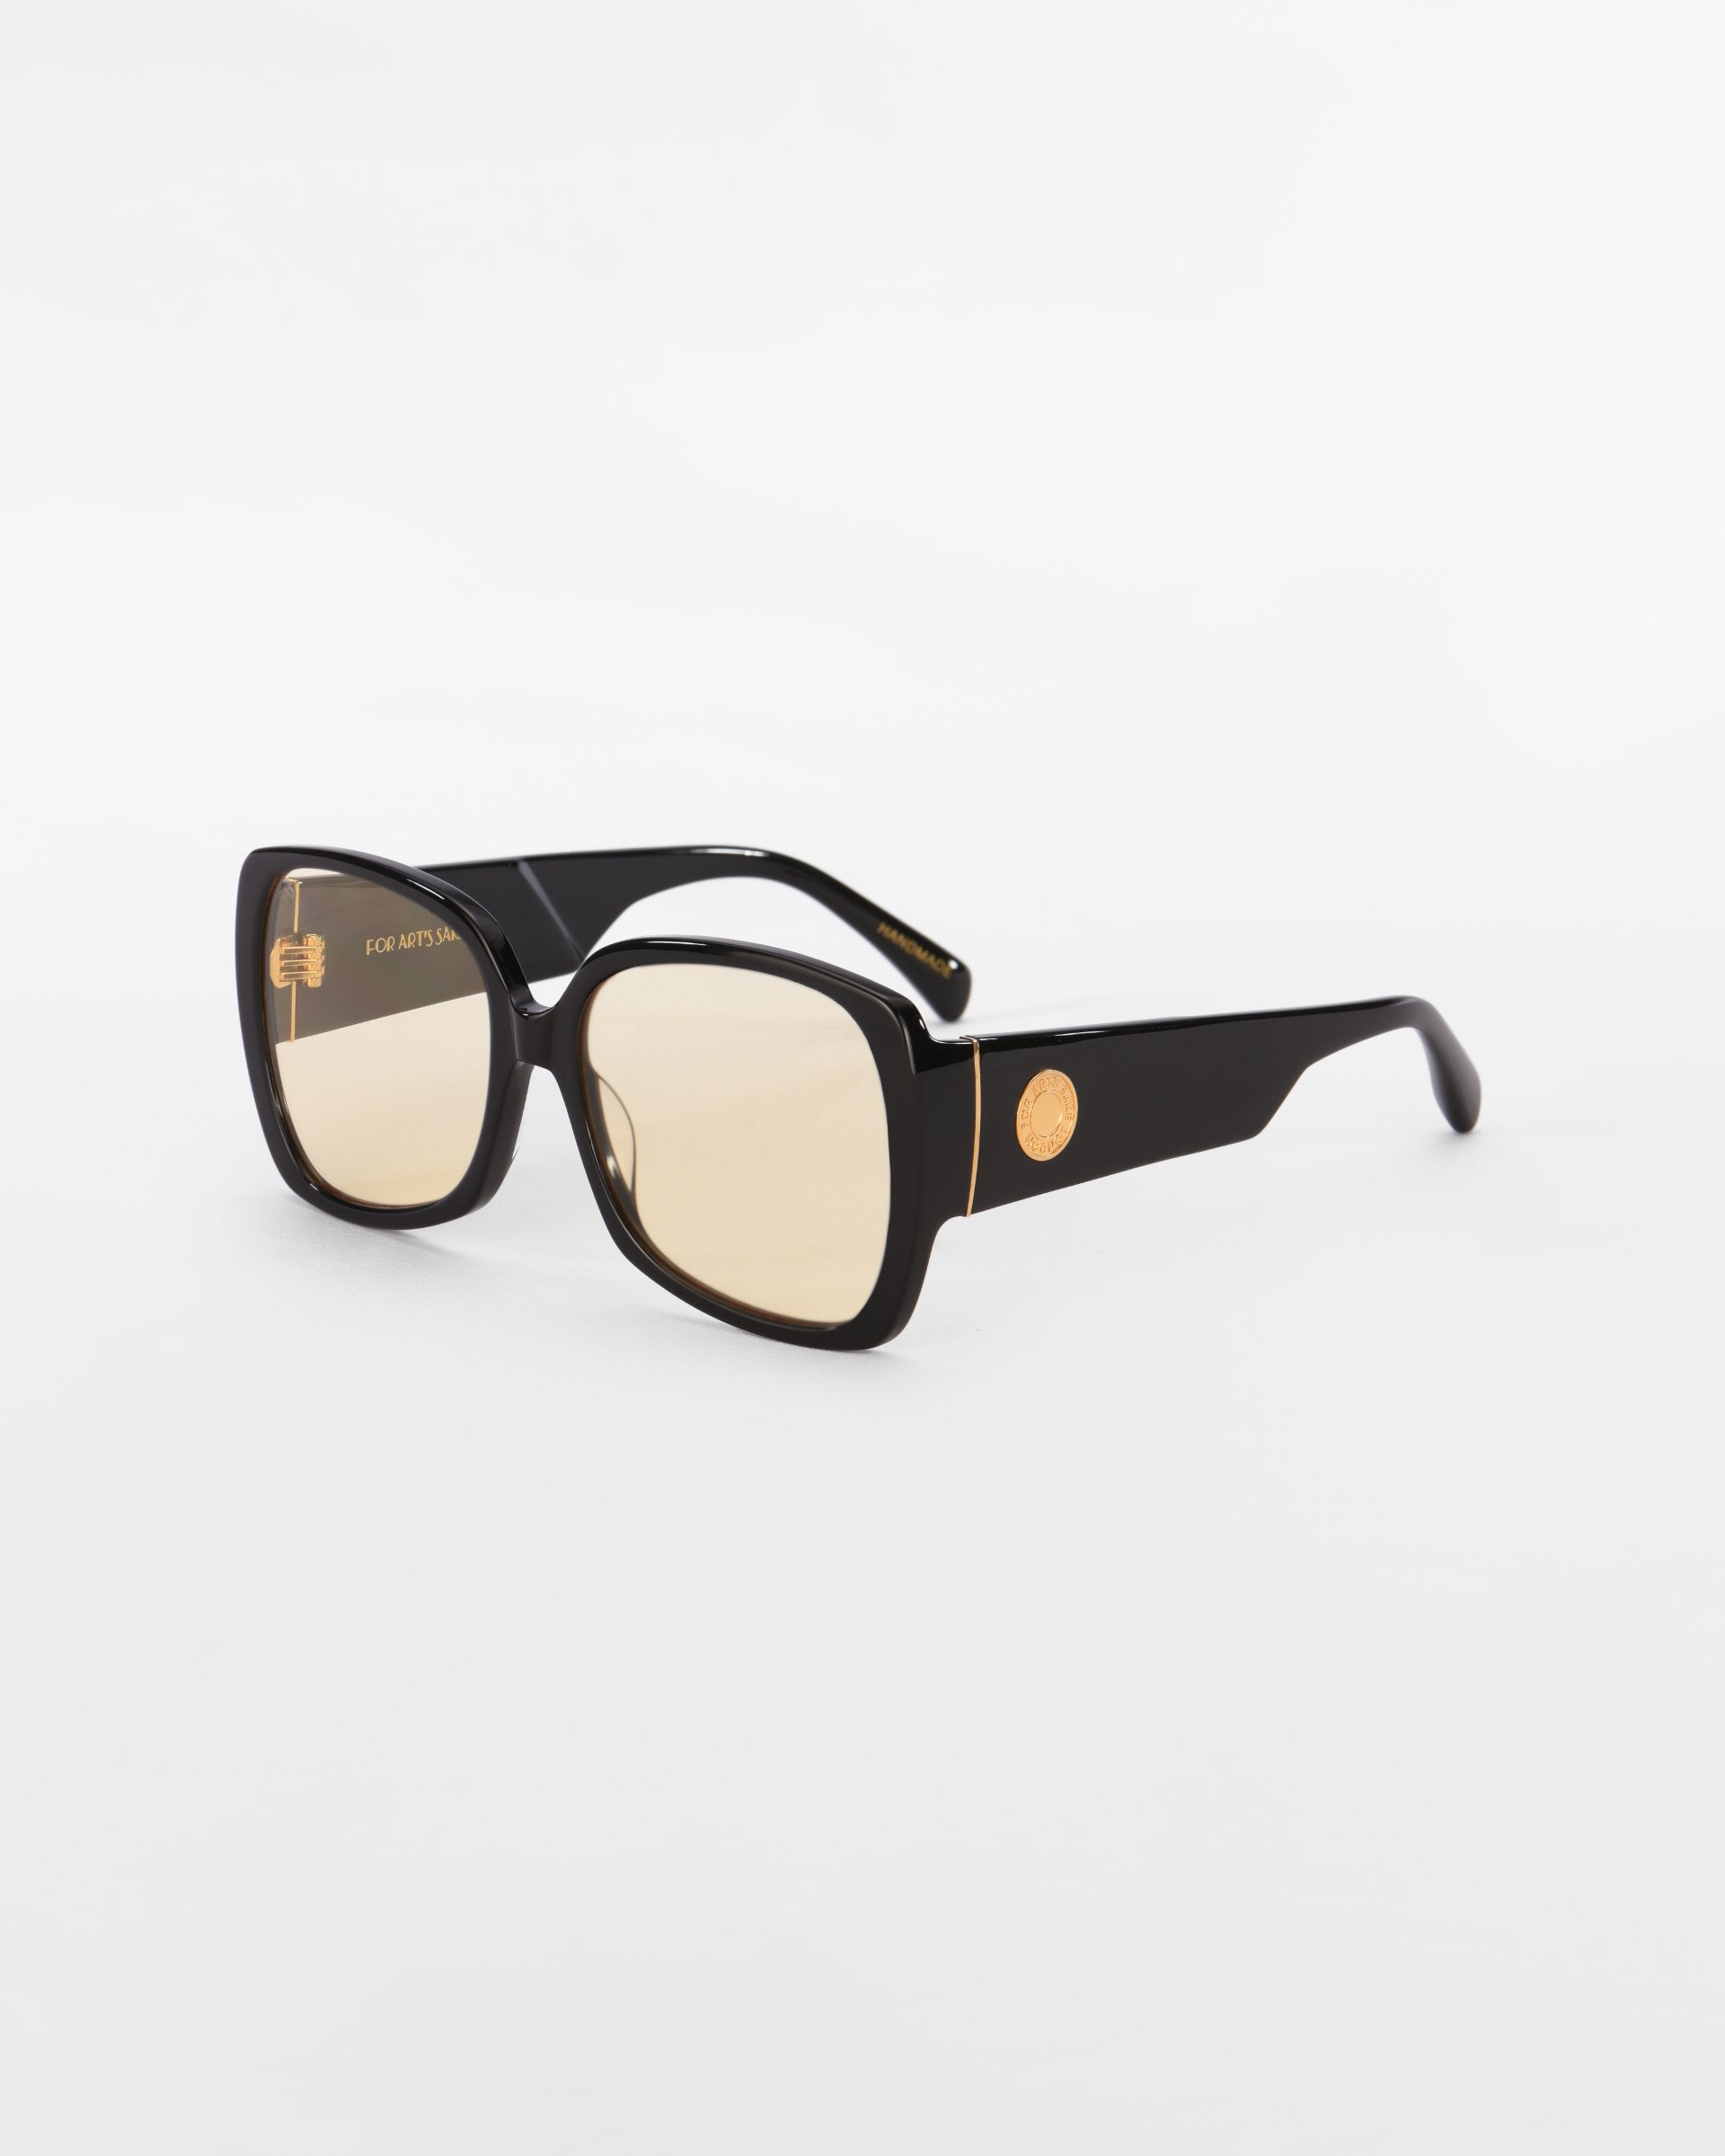 A pair of stylish, oversized black For Art&#39;s Sake® Odyssey sunglasses with rectangular lenses and gold accents on the temples, including a small emblem. The lightweight nylon lenses have a slight amber tint, complemented by 18-karat gold plating, and the background is plain white.